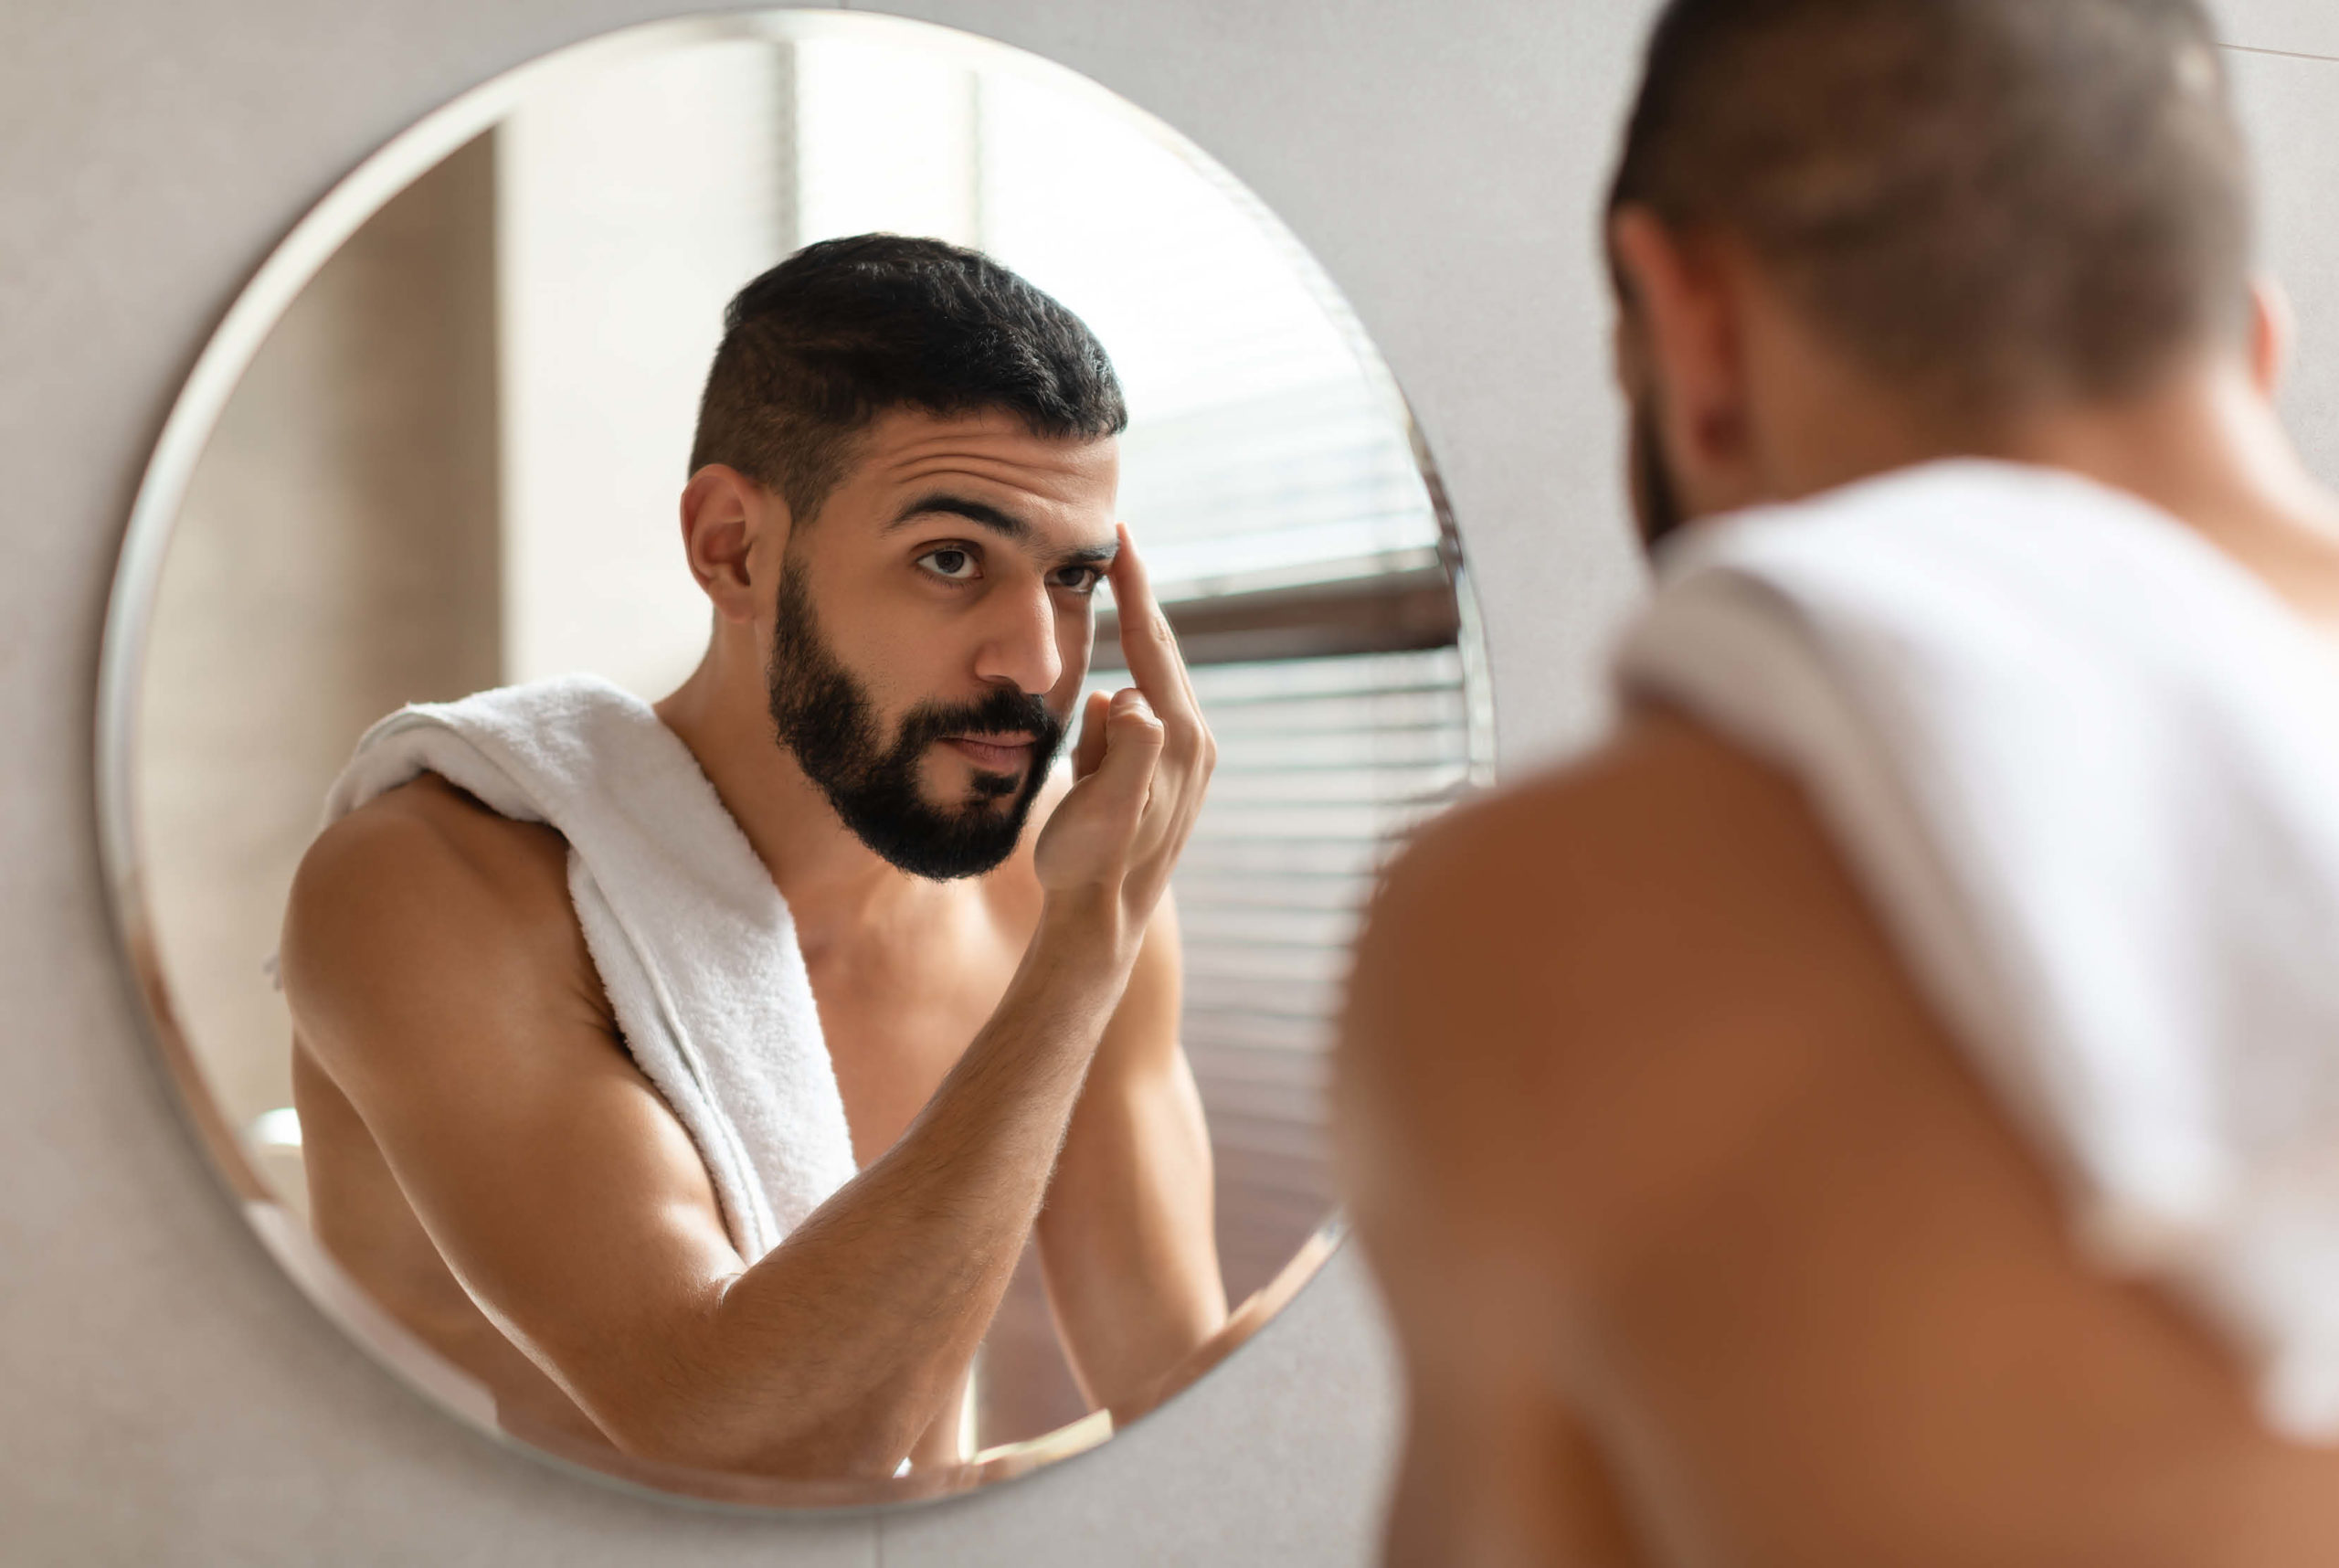 How to Eyebrow Grooming Guide For Men